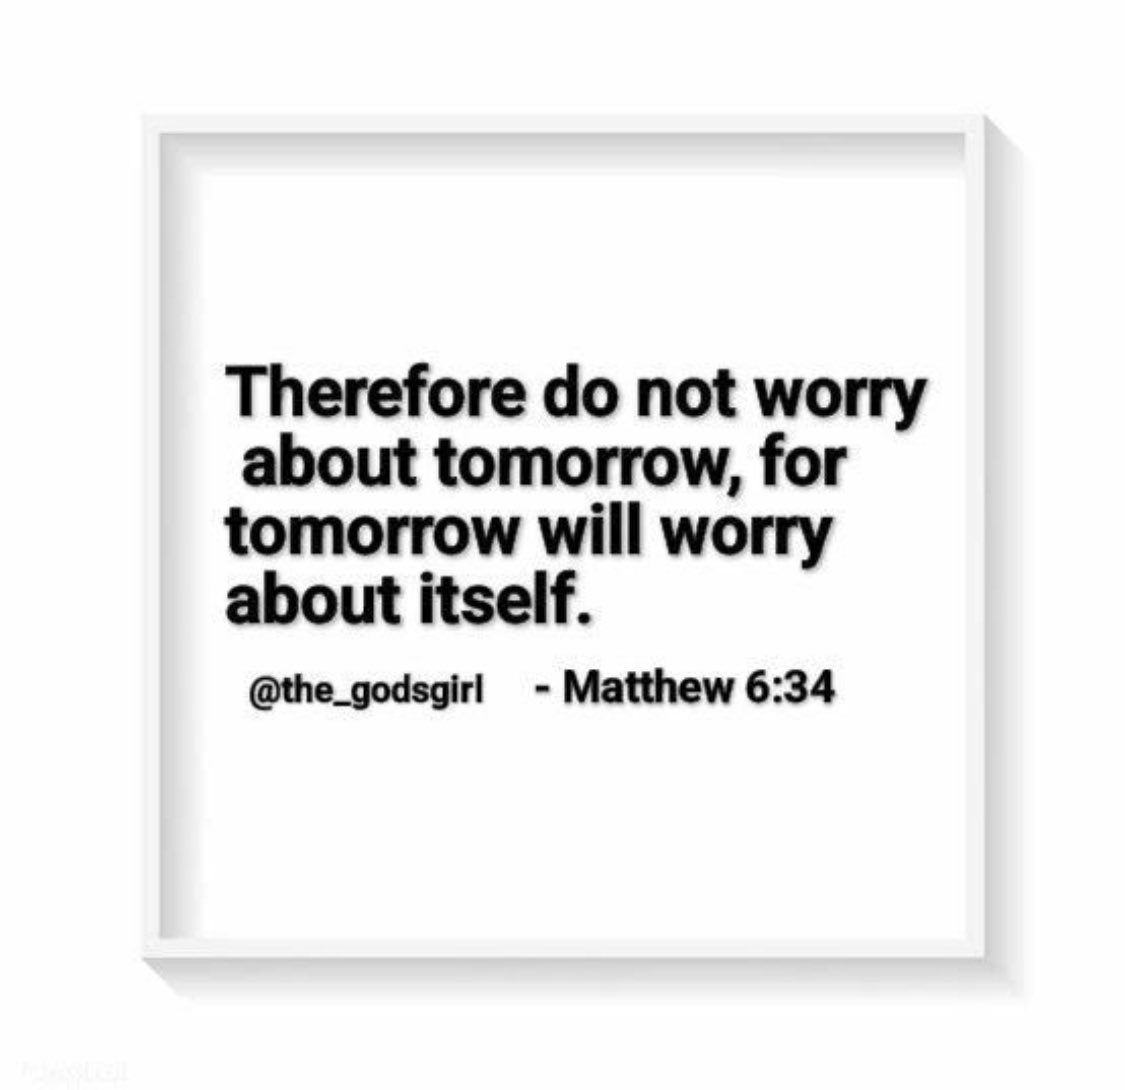 “Therefore do not worry about tomorrow, for tomorrow will worry about itself. Today has enough trouble of its own.” Matthew 6:34